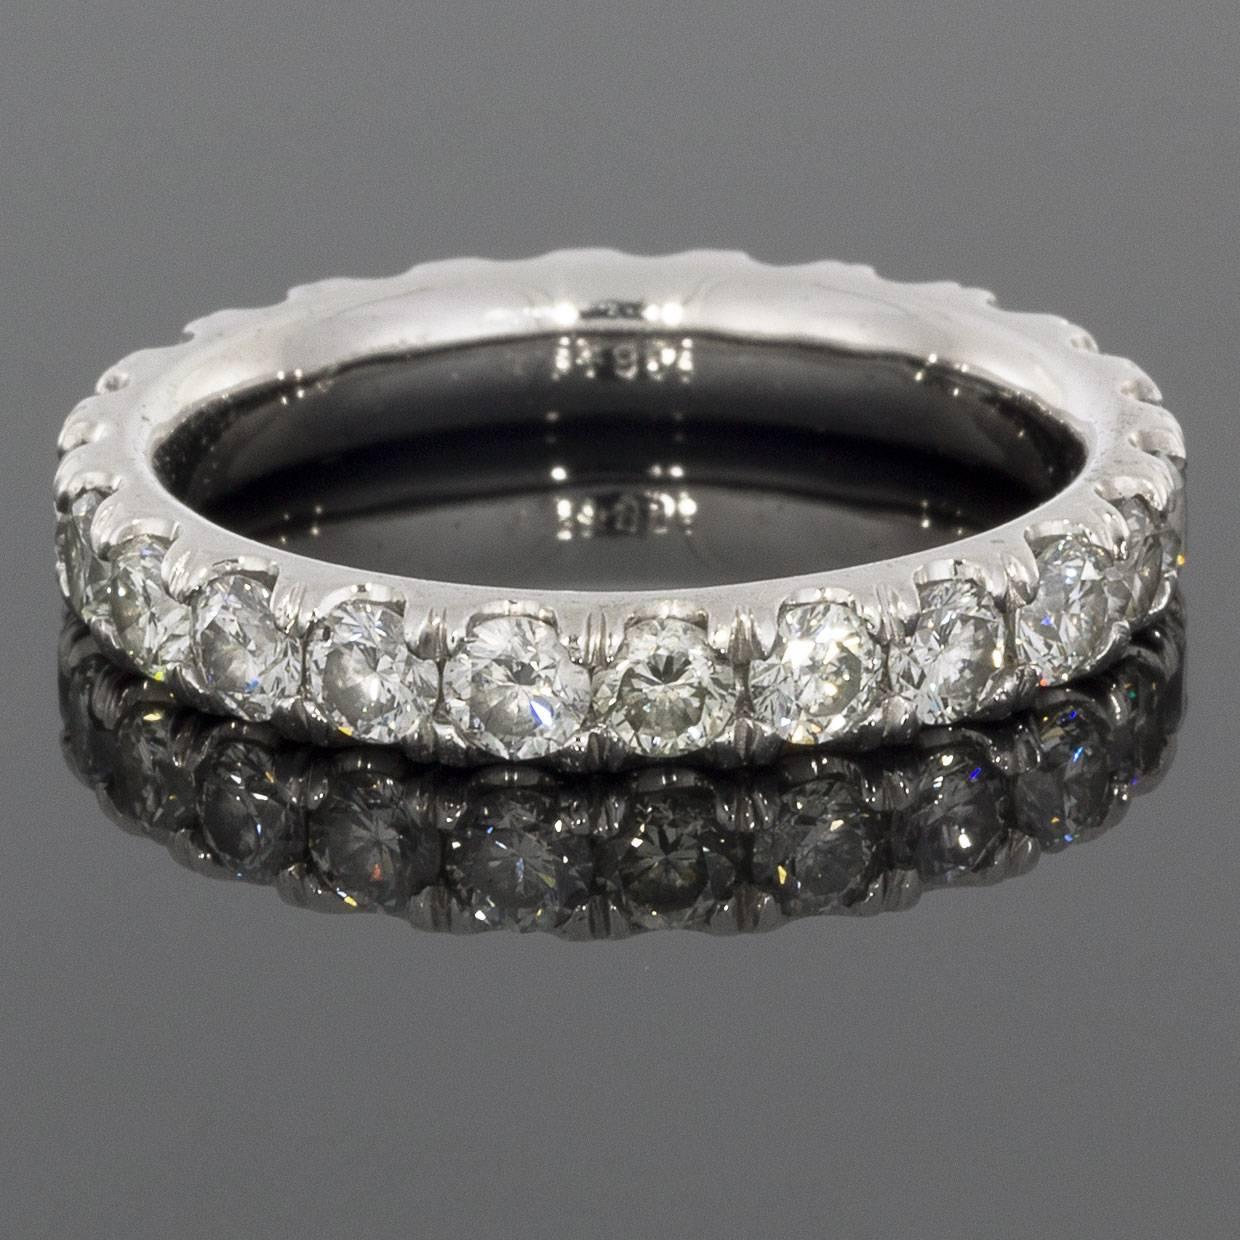 This classic band is a beautiful platinum diamond eternity band that can dress up any ring. It can be used as a wedding band, stand alone band, or stack ring. The ring has round brilliant cut diamonds that have a combined total weight of 2.37